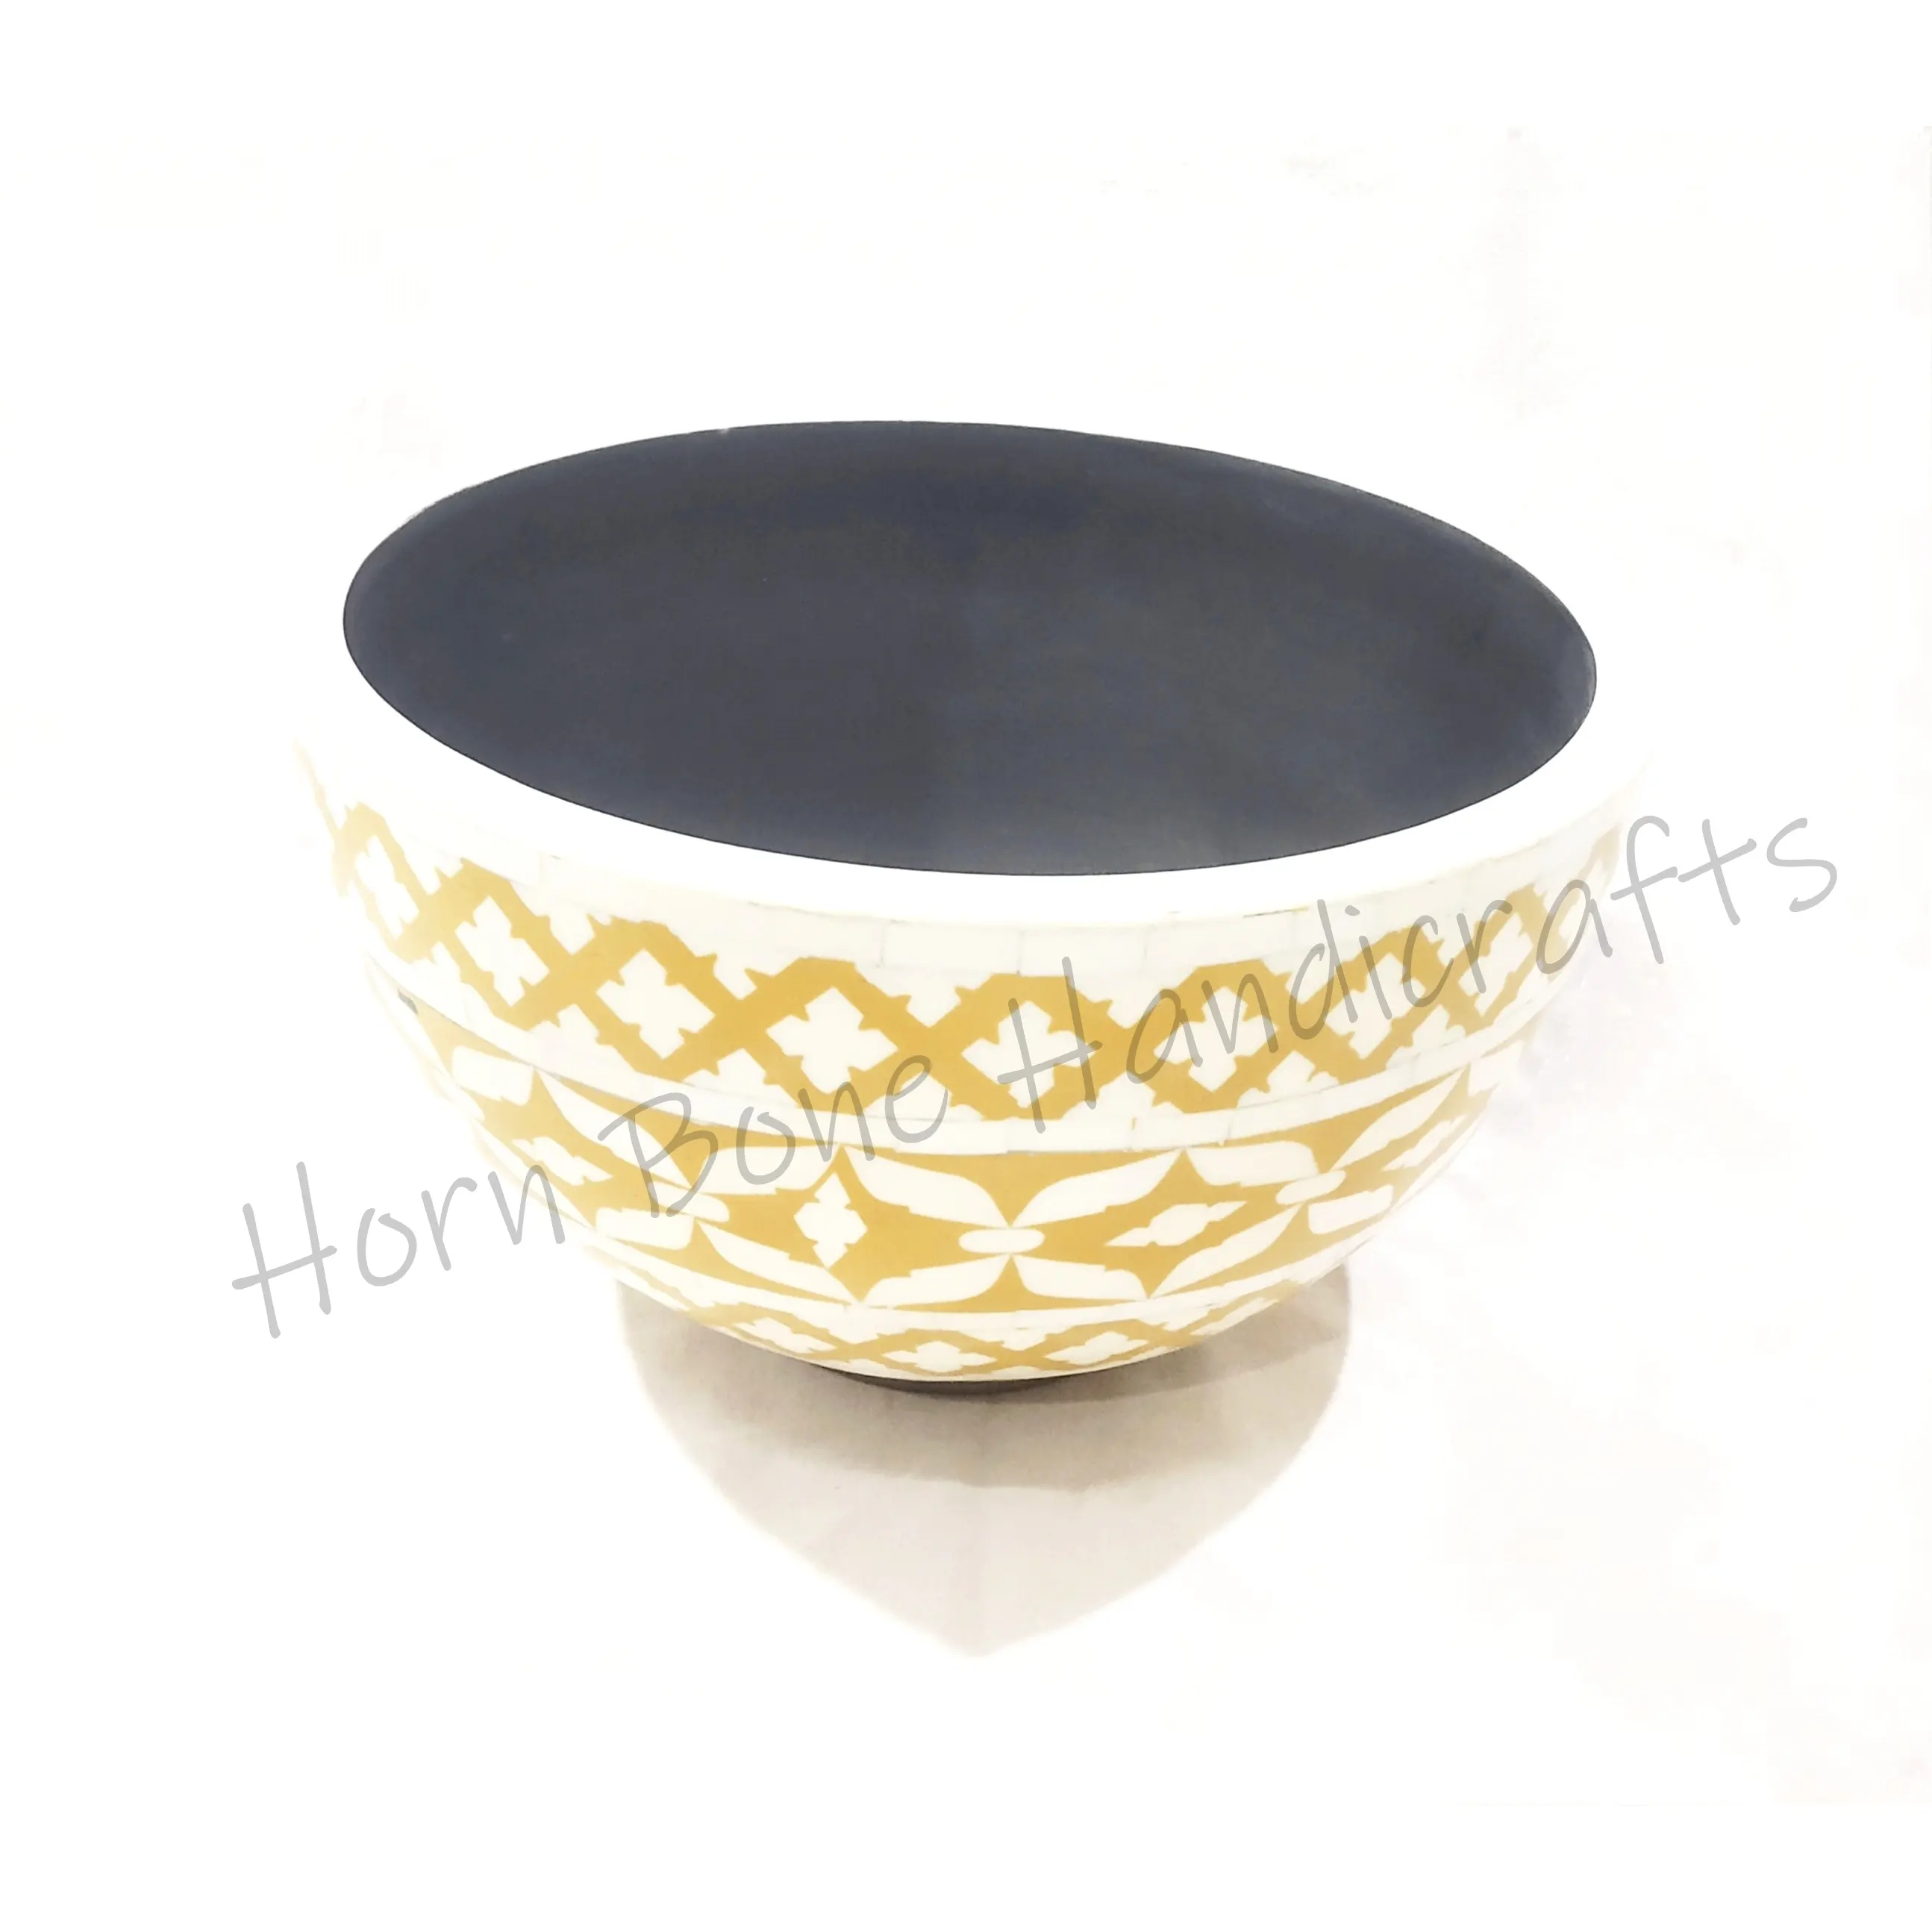 Indian Handmade Bone Inlay Chocolate Bowl Handcrafted Floral Bone Inlay Serving Bowl Mother of Pearl Deep Depth Chocolate Bowl